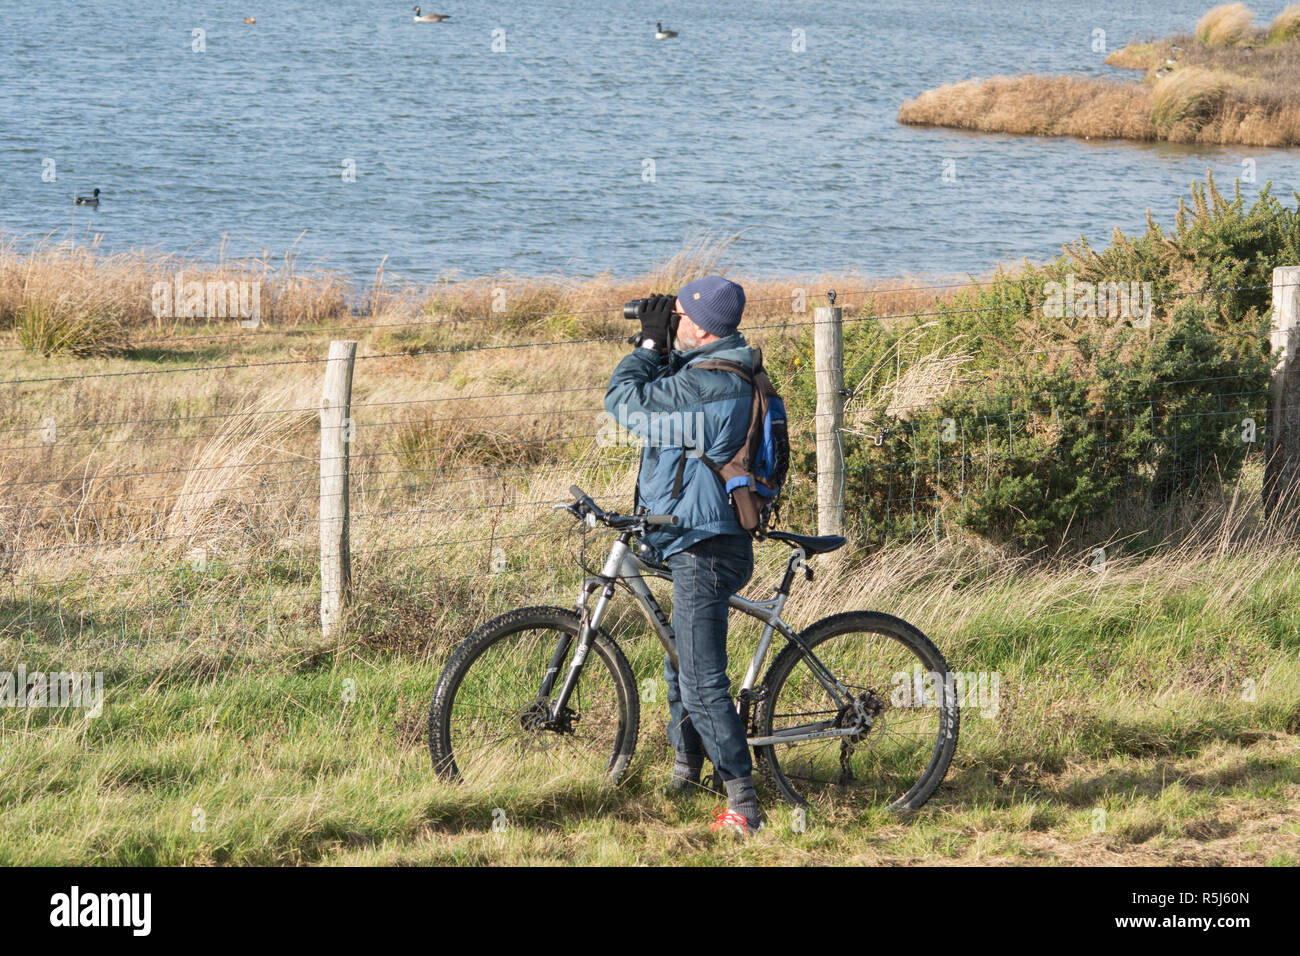 RSPB Medmerry Nature Reserve by the coast, West Sussex, UK. Birdwatcher on a bicycle looking at birds on the stilt pools through binoculars Stock Photo